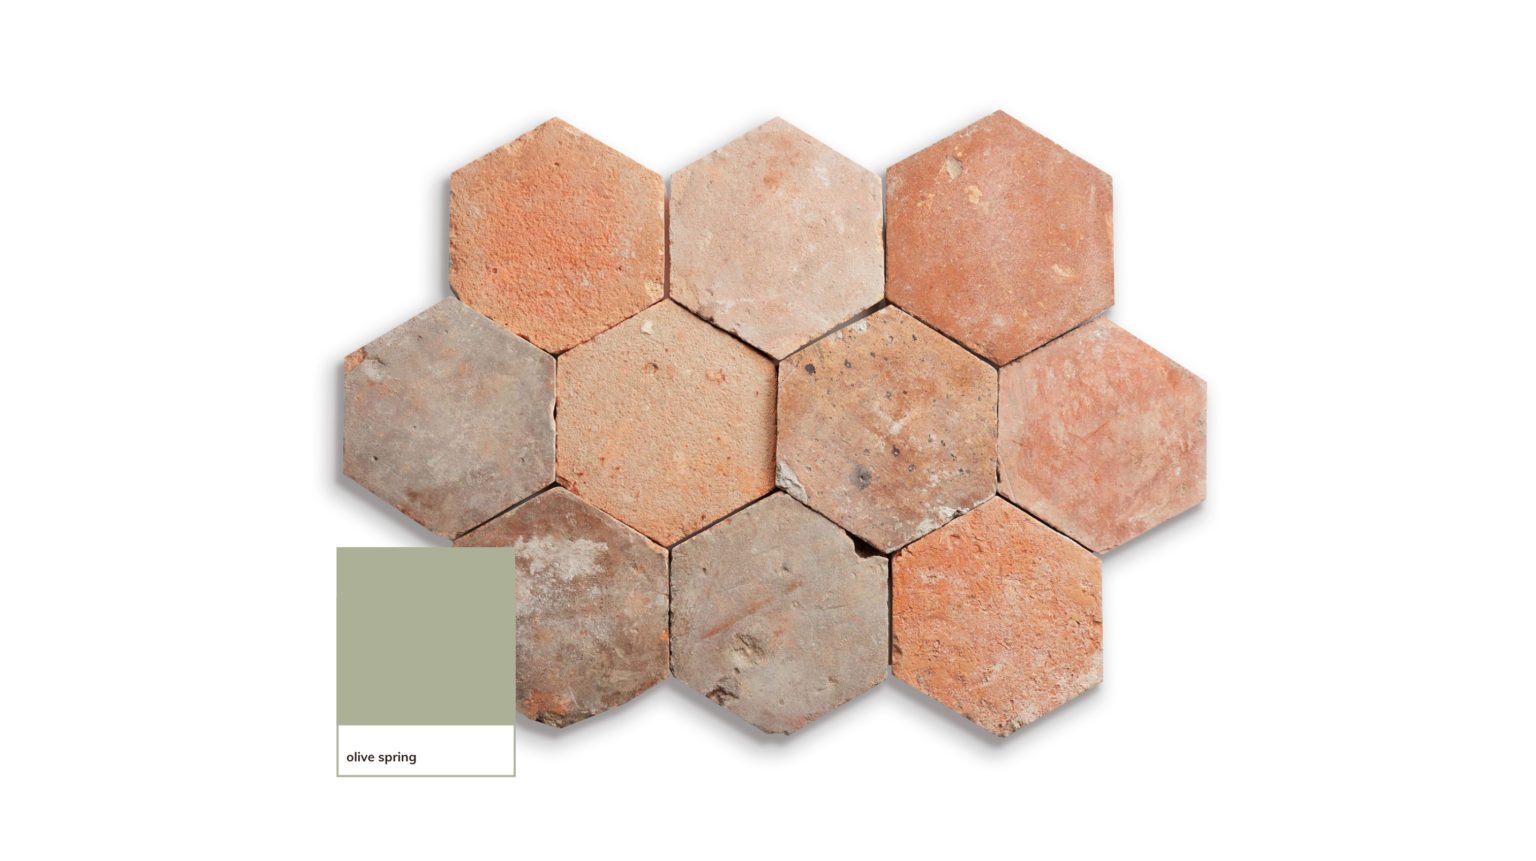 an image showing a pairing of Pittsburgh Paints Olive Sprig with Antique Terracotta Hexagons